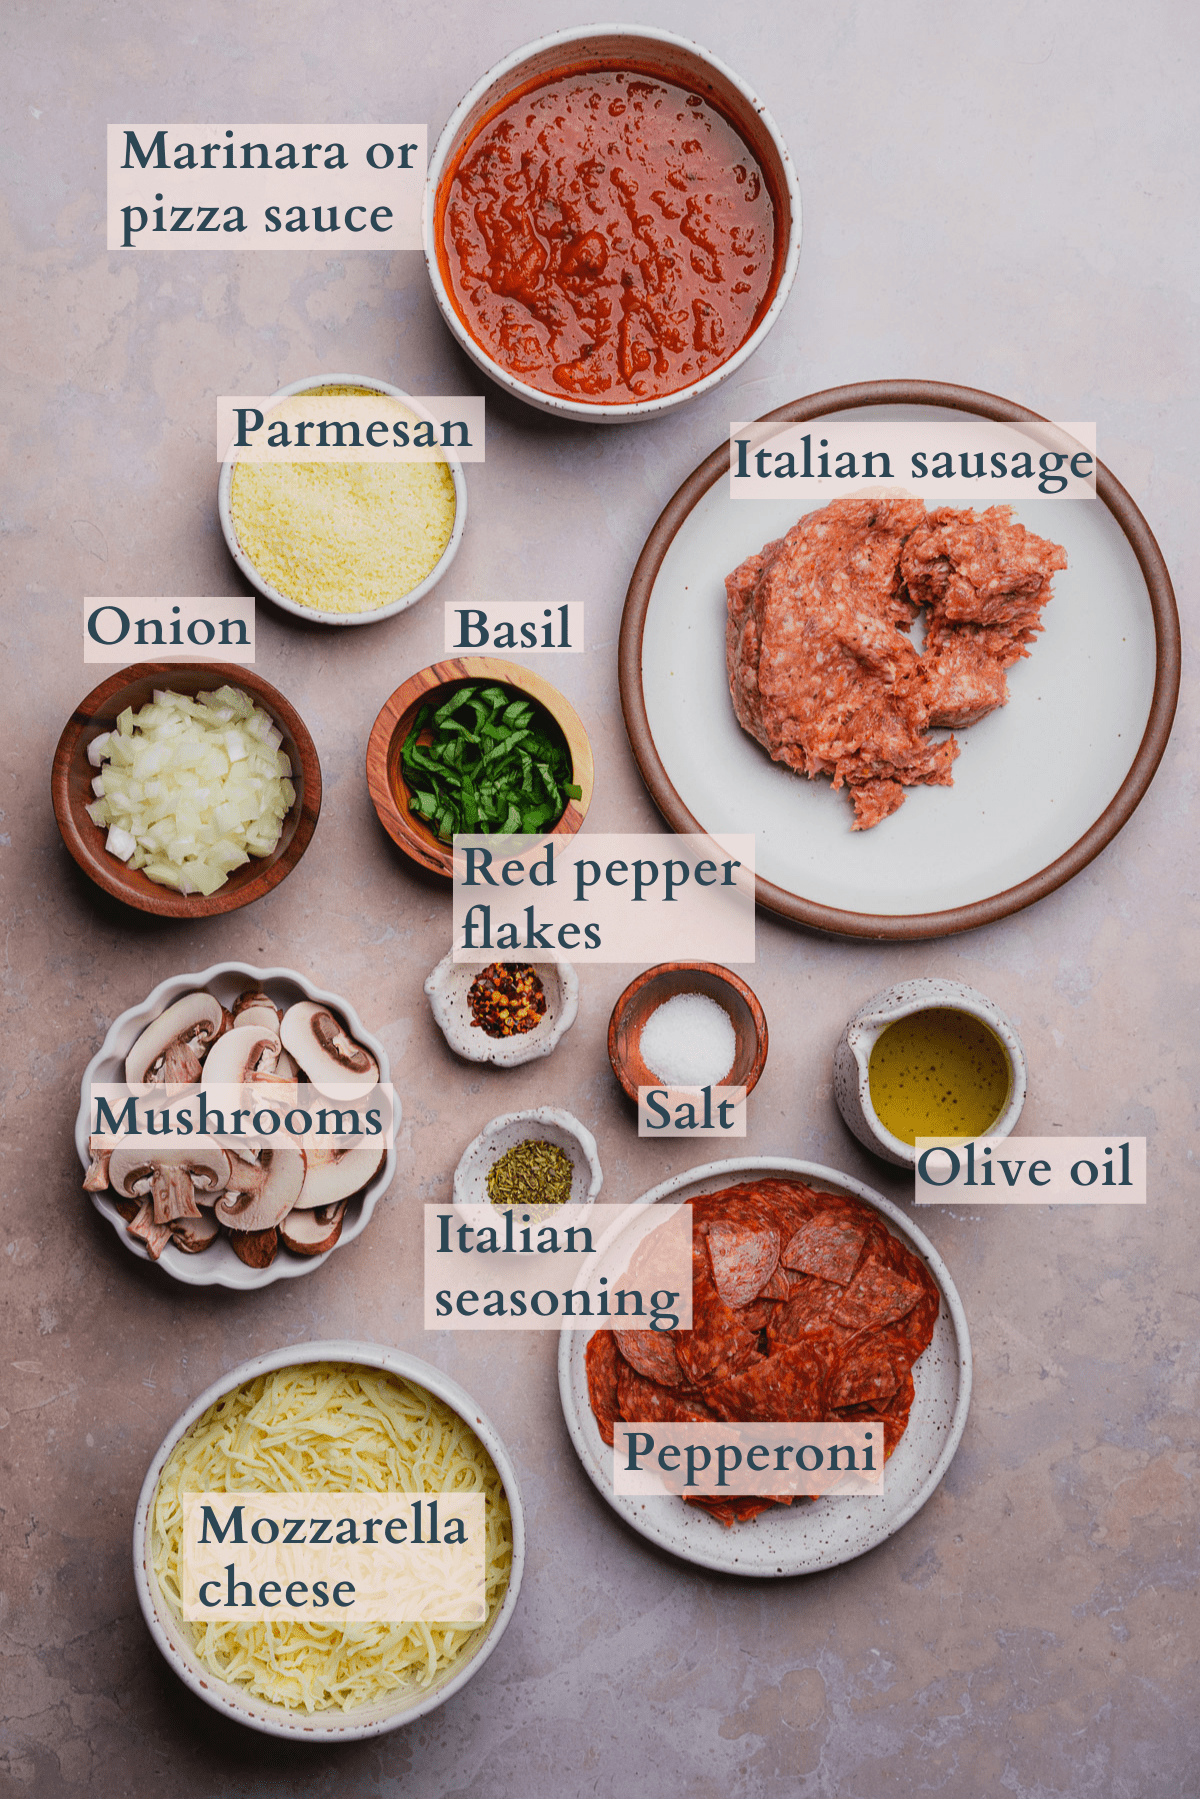 pizza bowl recipe ingredients with text to denote different ingredients, featuring marinara sauce, basil, mozzarella, parmesan, Italian sausage, pepperoni, red pepper flakes, Italian seasoning, salt, mushrooms, onion, and olive oil. 